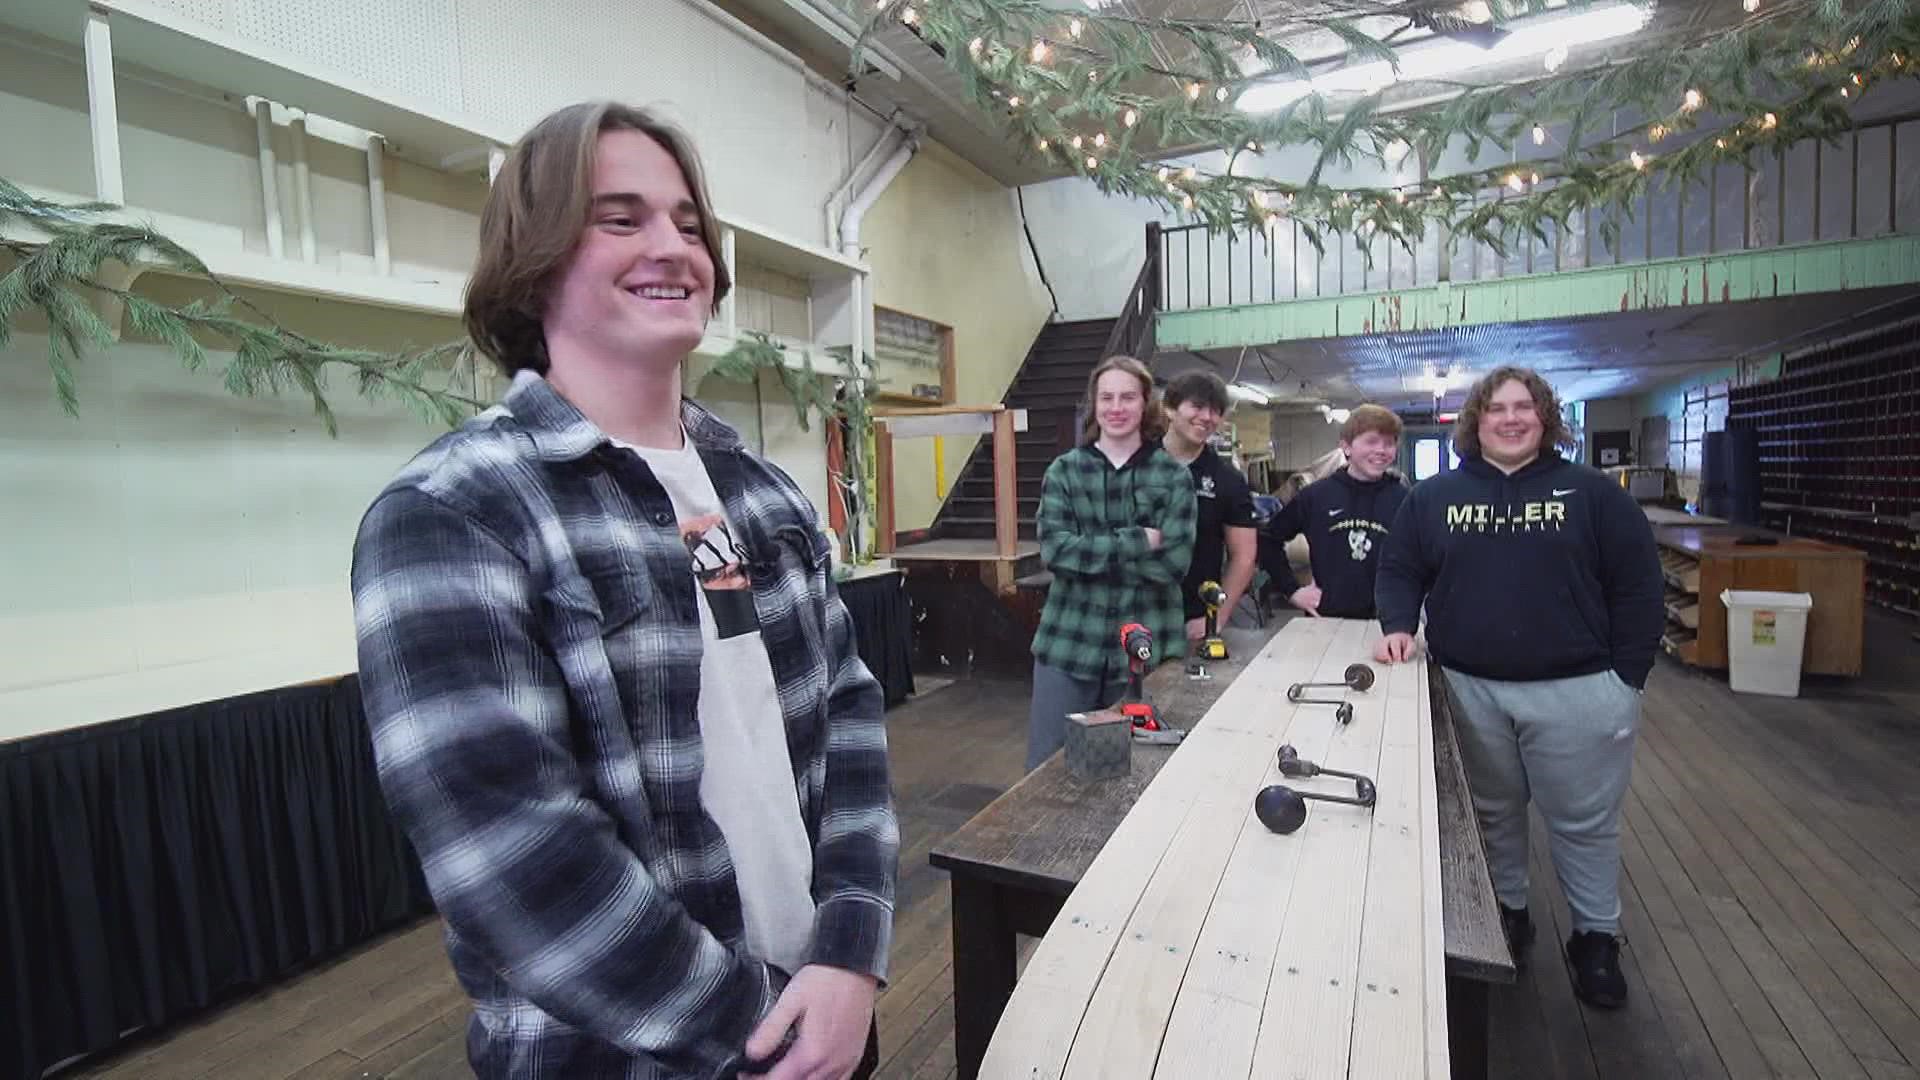 A group of students in Noblesville spent part of this snowy day building their own toboggan.